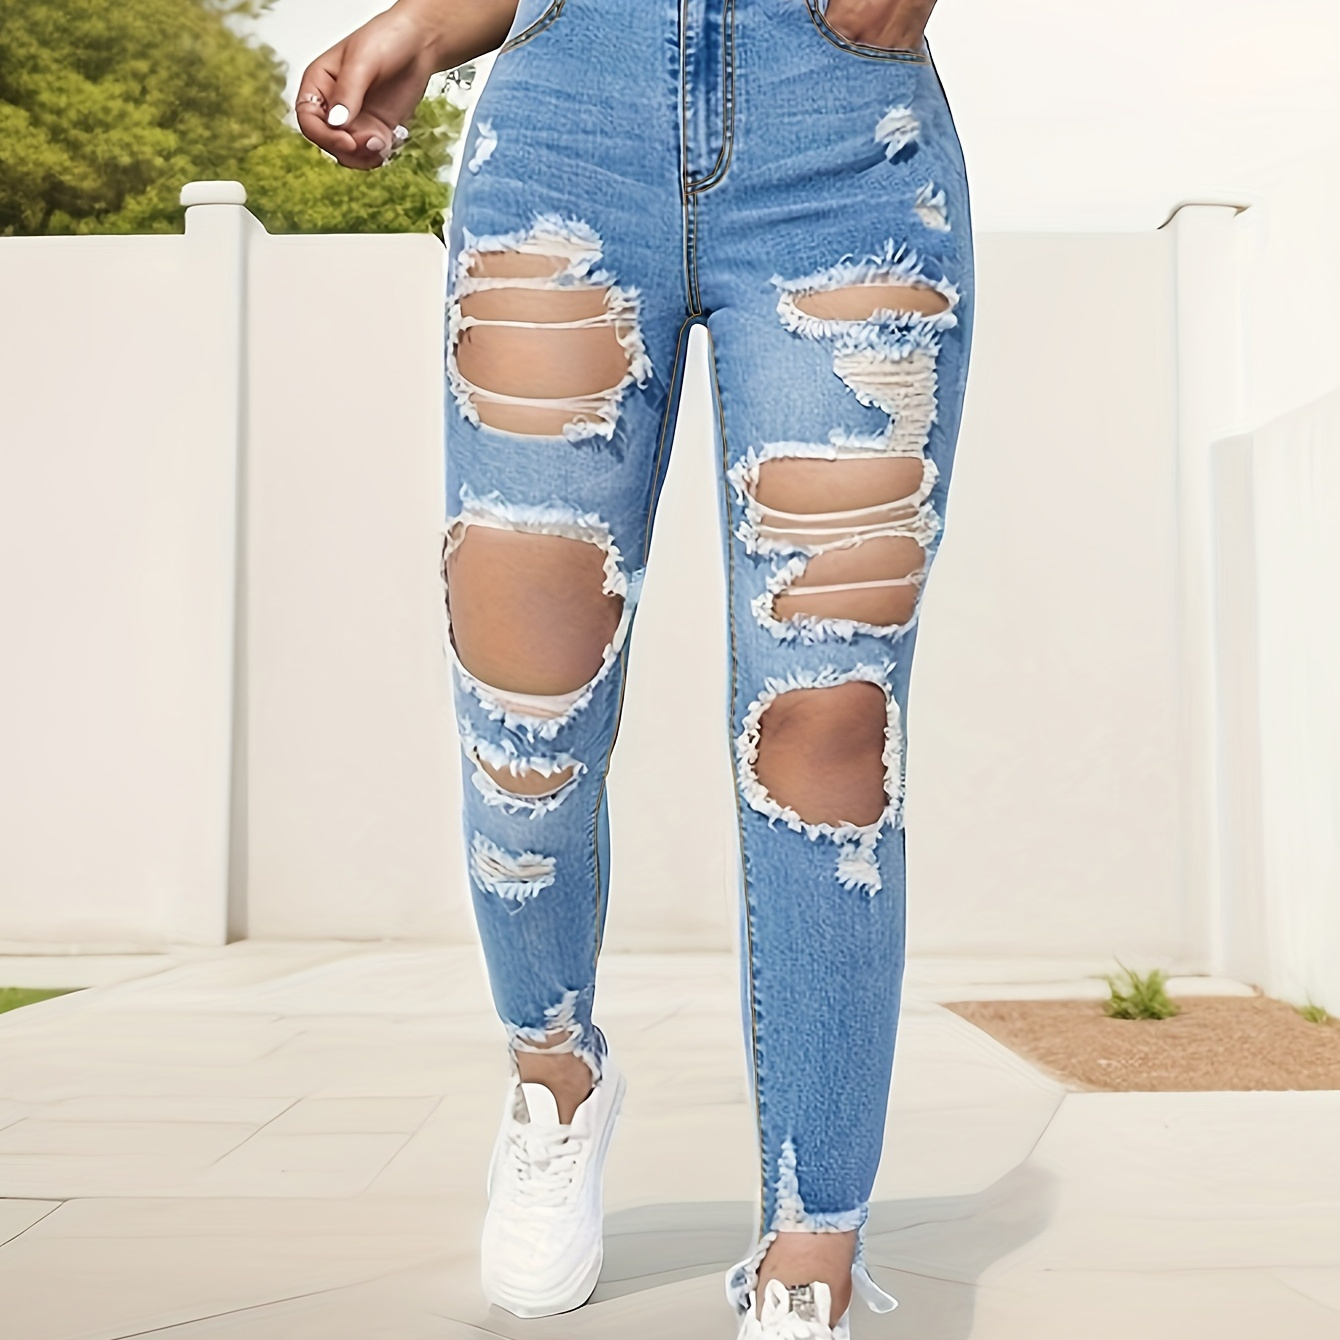 

Ripped Holes Washed Skinny Jeans, Slim Fit High Stretch Distressed Tight Jeans, Women's Denim Jeans & Clothing